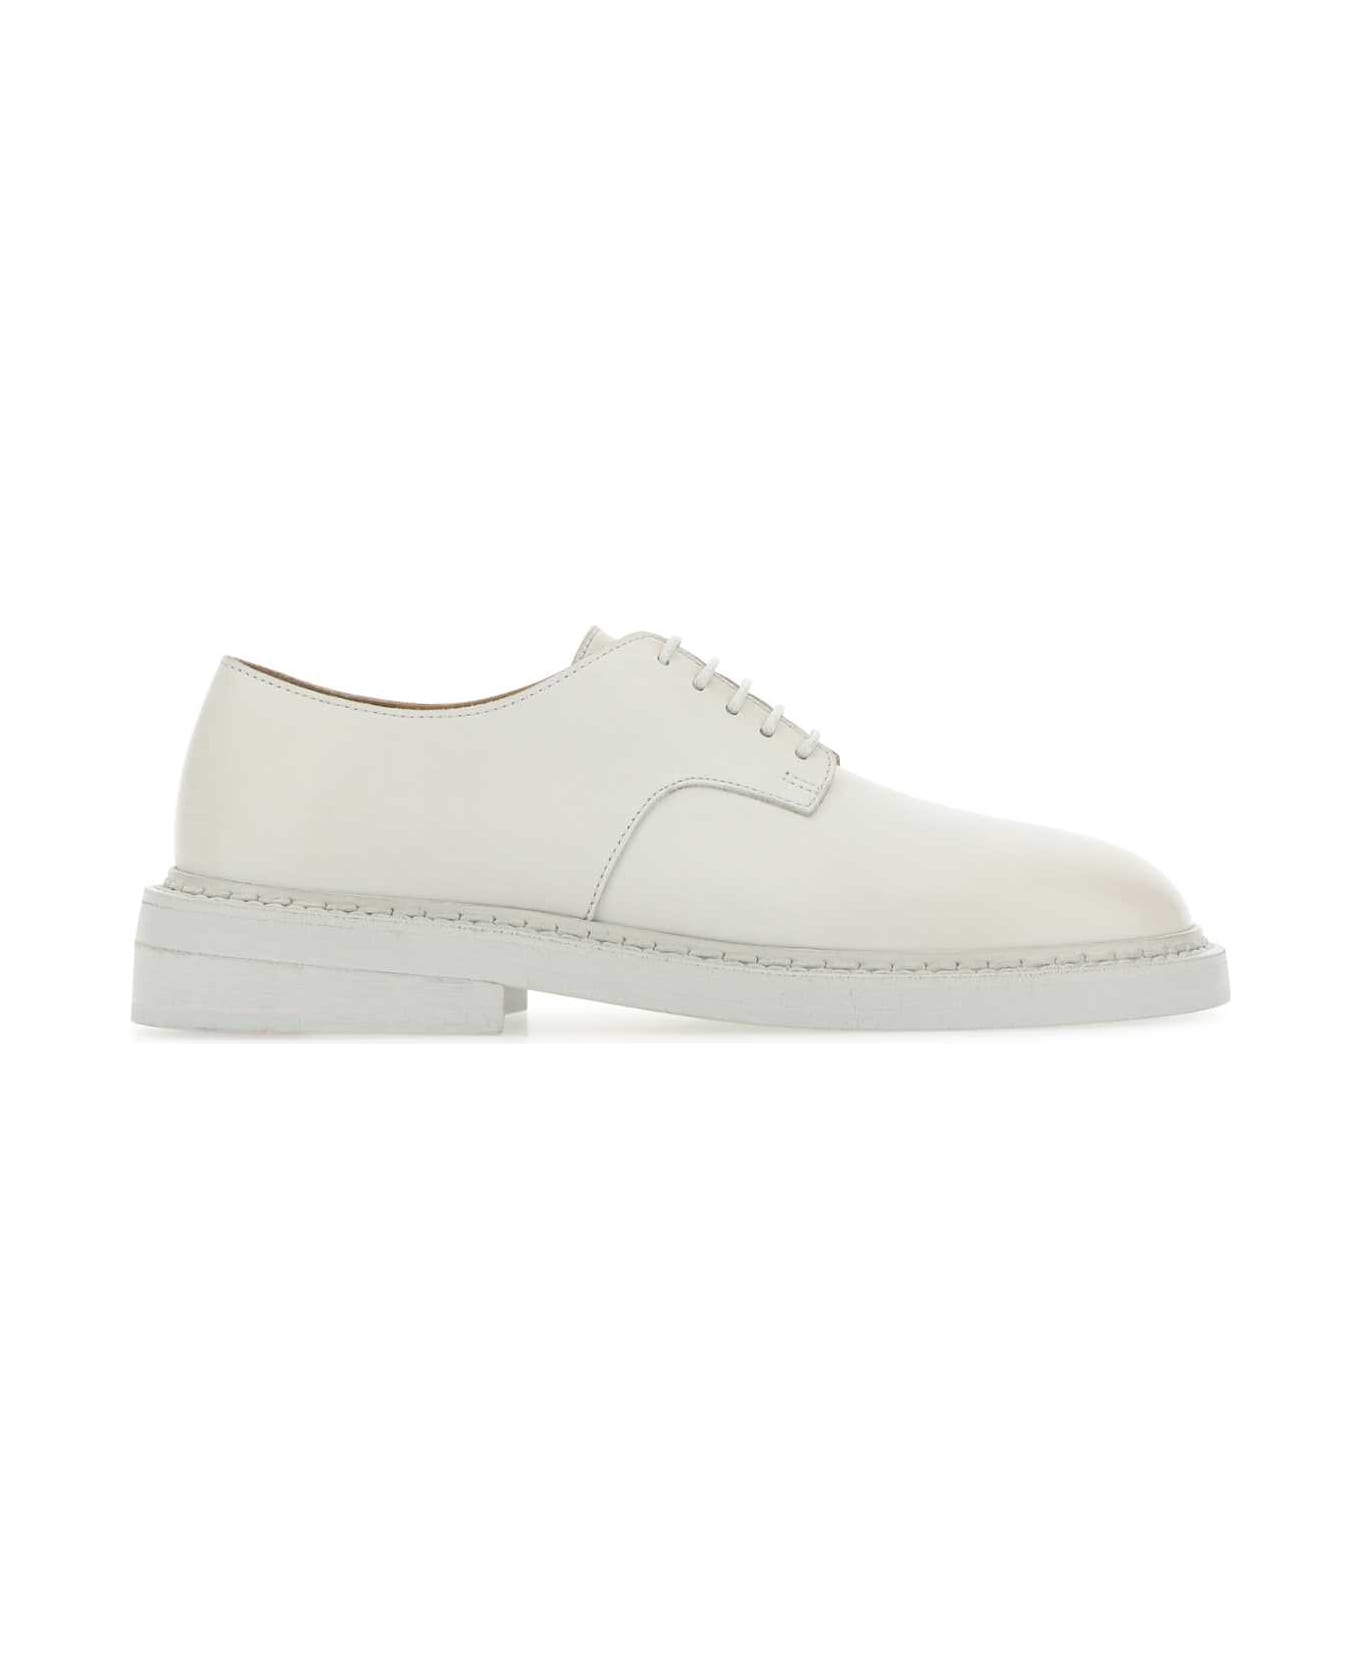 Marsell Chalk Leather Nasello Lace-up Shoes - 121 フラットシューズ